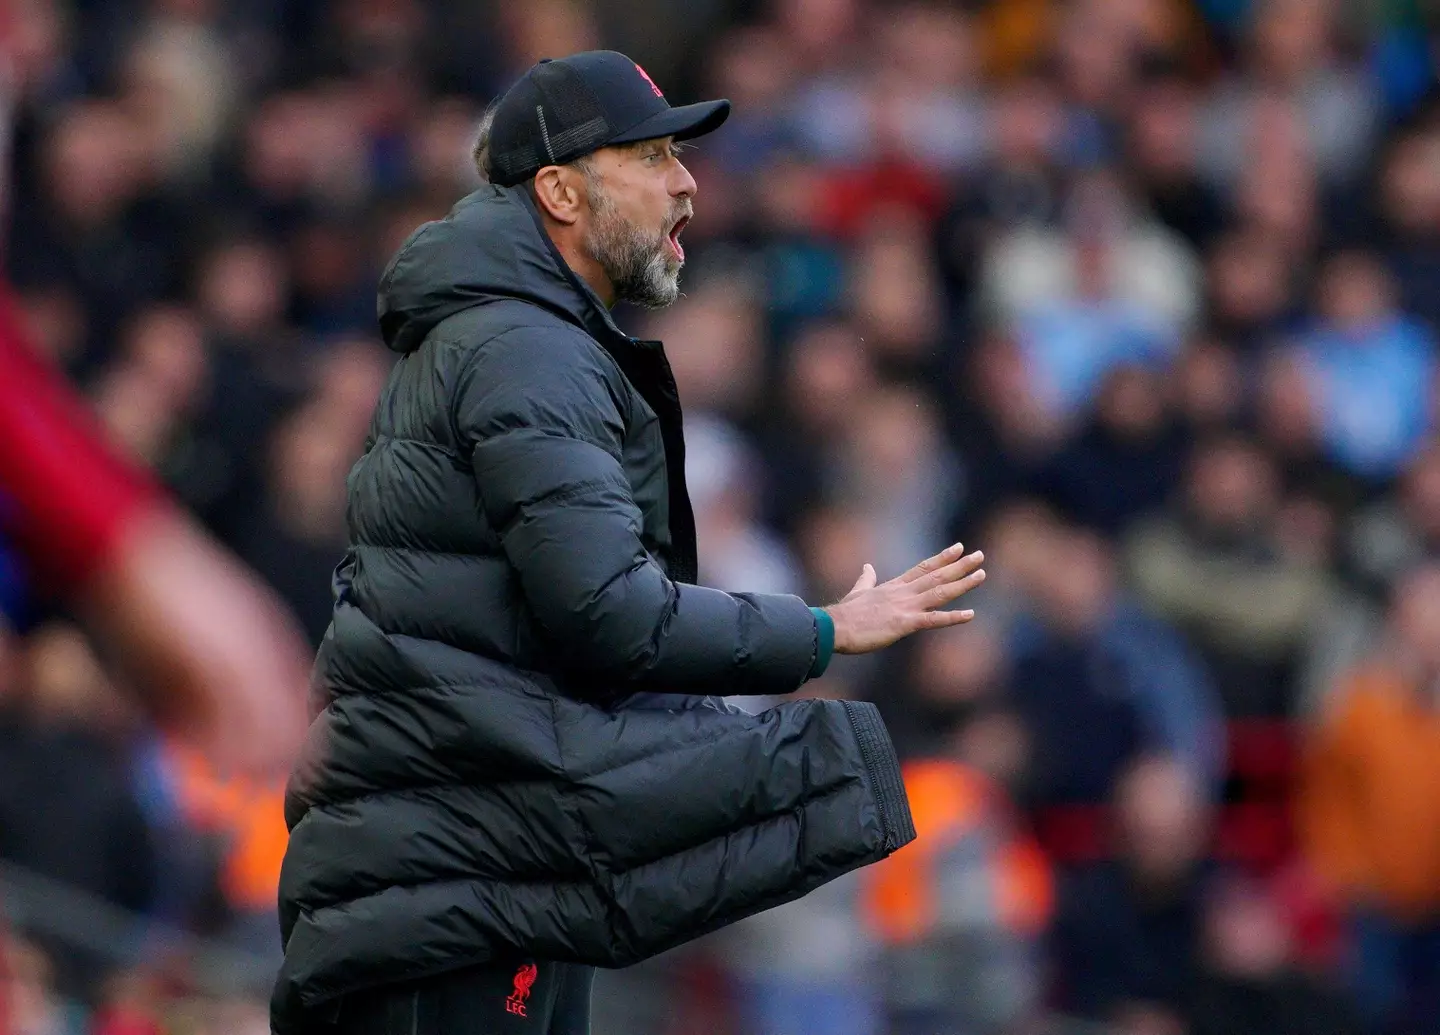 Klopp said that Liverpool were unable to compete financially with City (Image: Alamy)